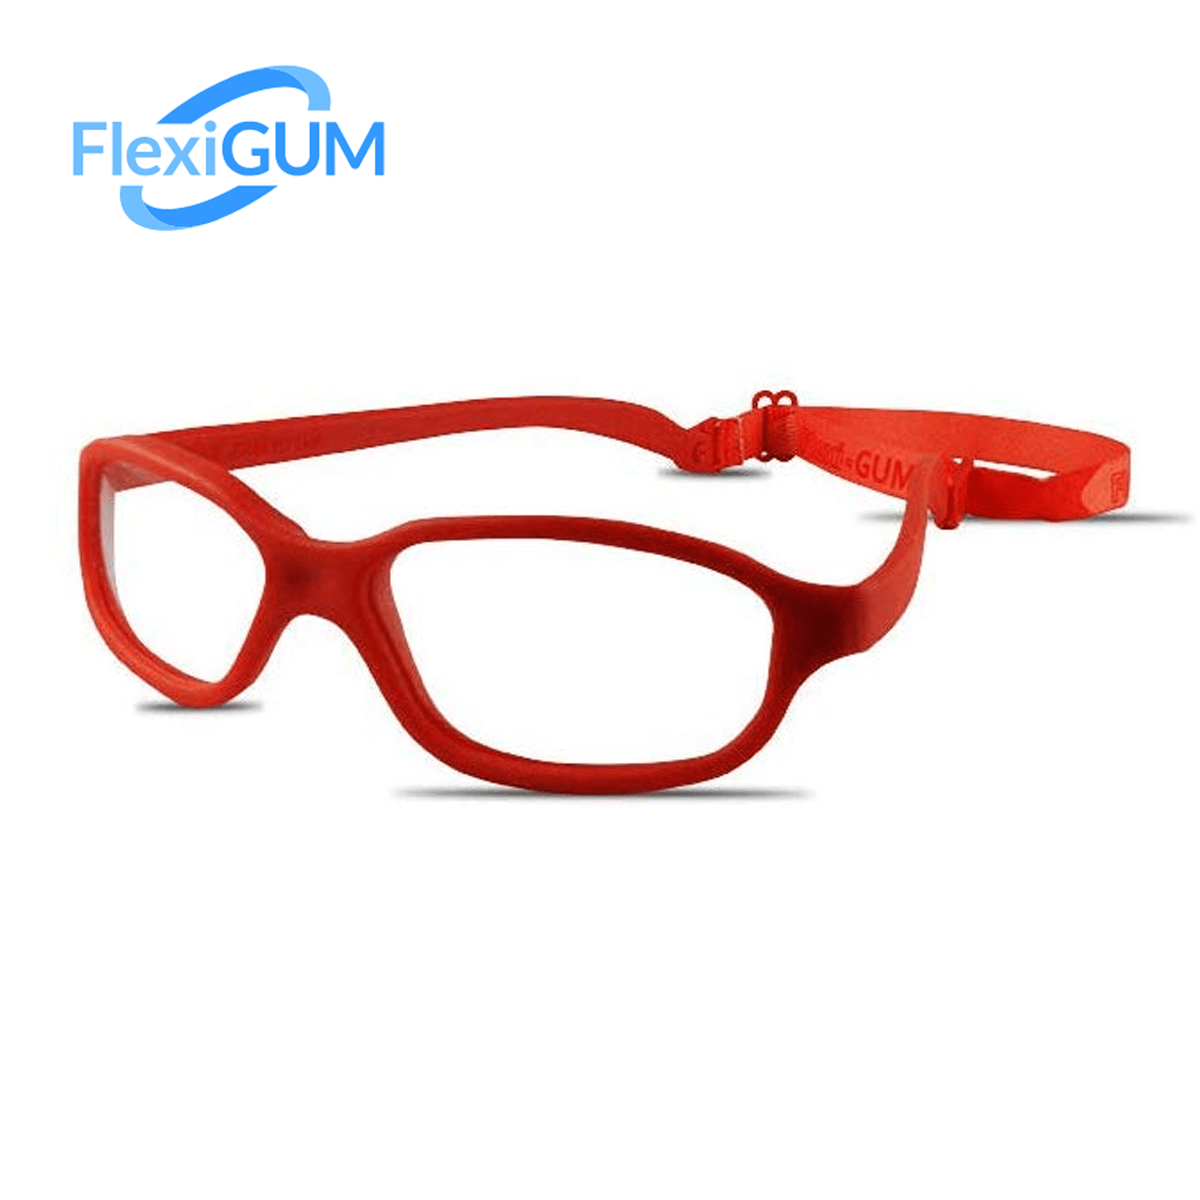 OVAL Safe-Unbreakable and Flexible Kids Eyeglasses Frame with Strap - Flexi-GUM